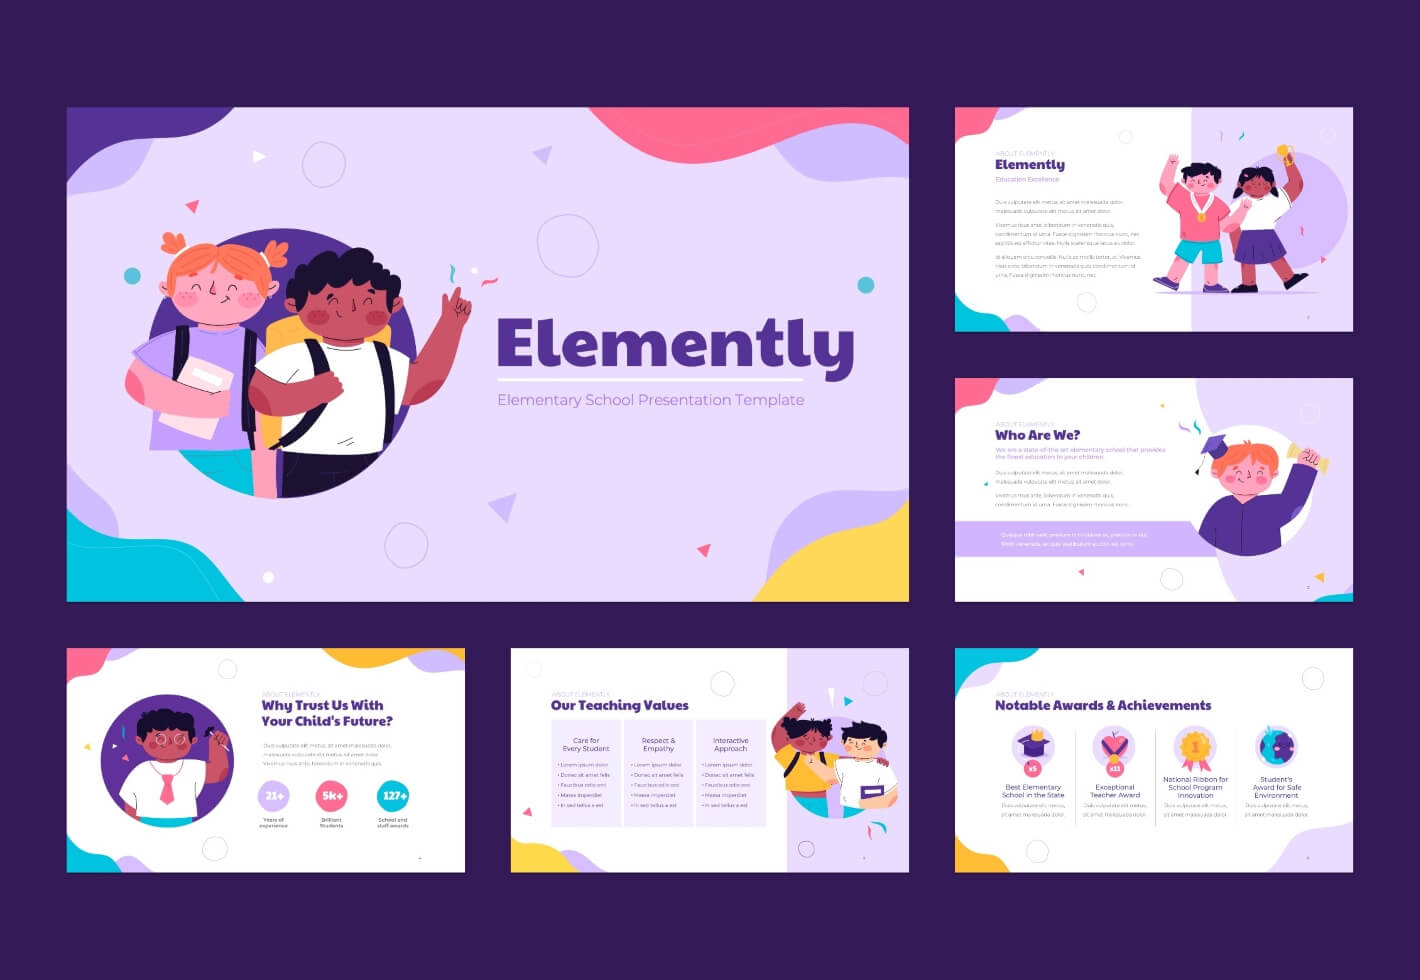 elemently-elementary-powerpoint-presentation-template-graphue-riset